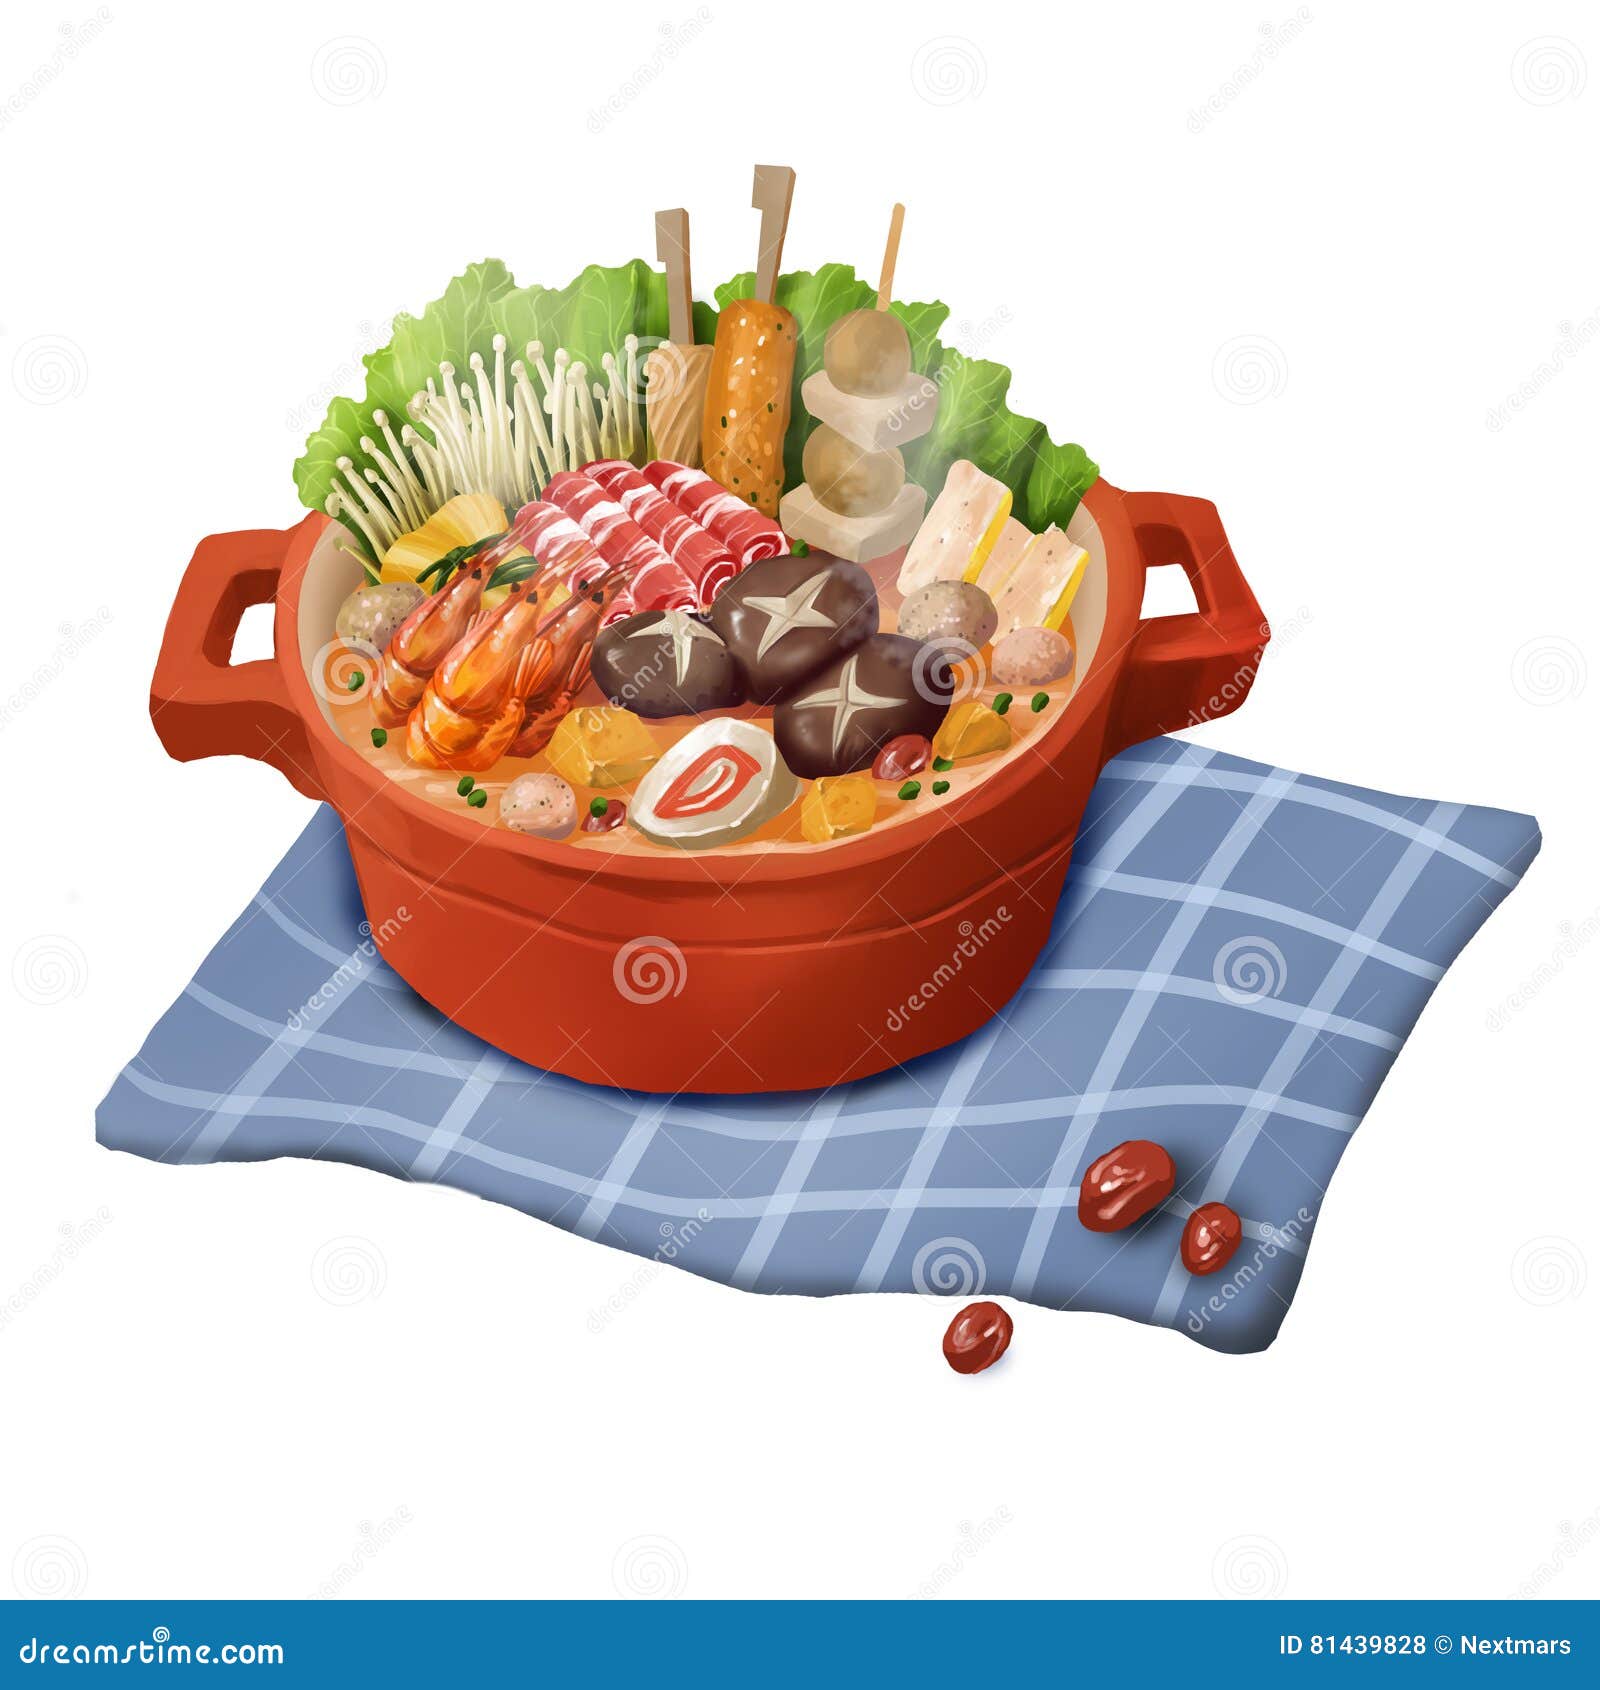 Vegetable Soup With Chop On White Dish. Royalty-Free Stock Image